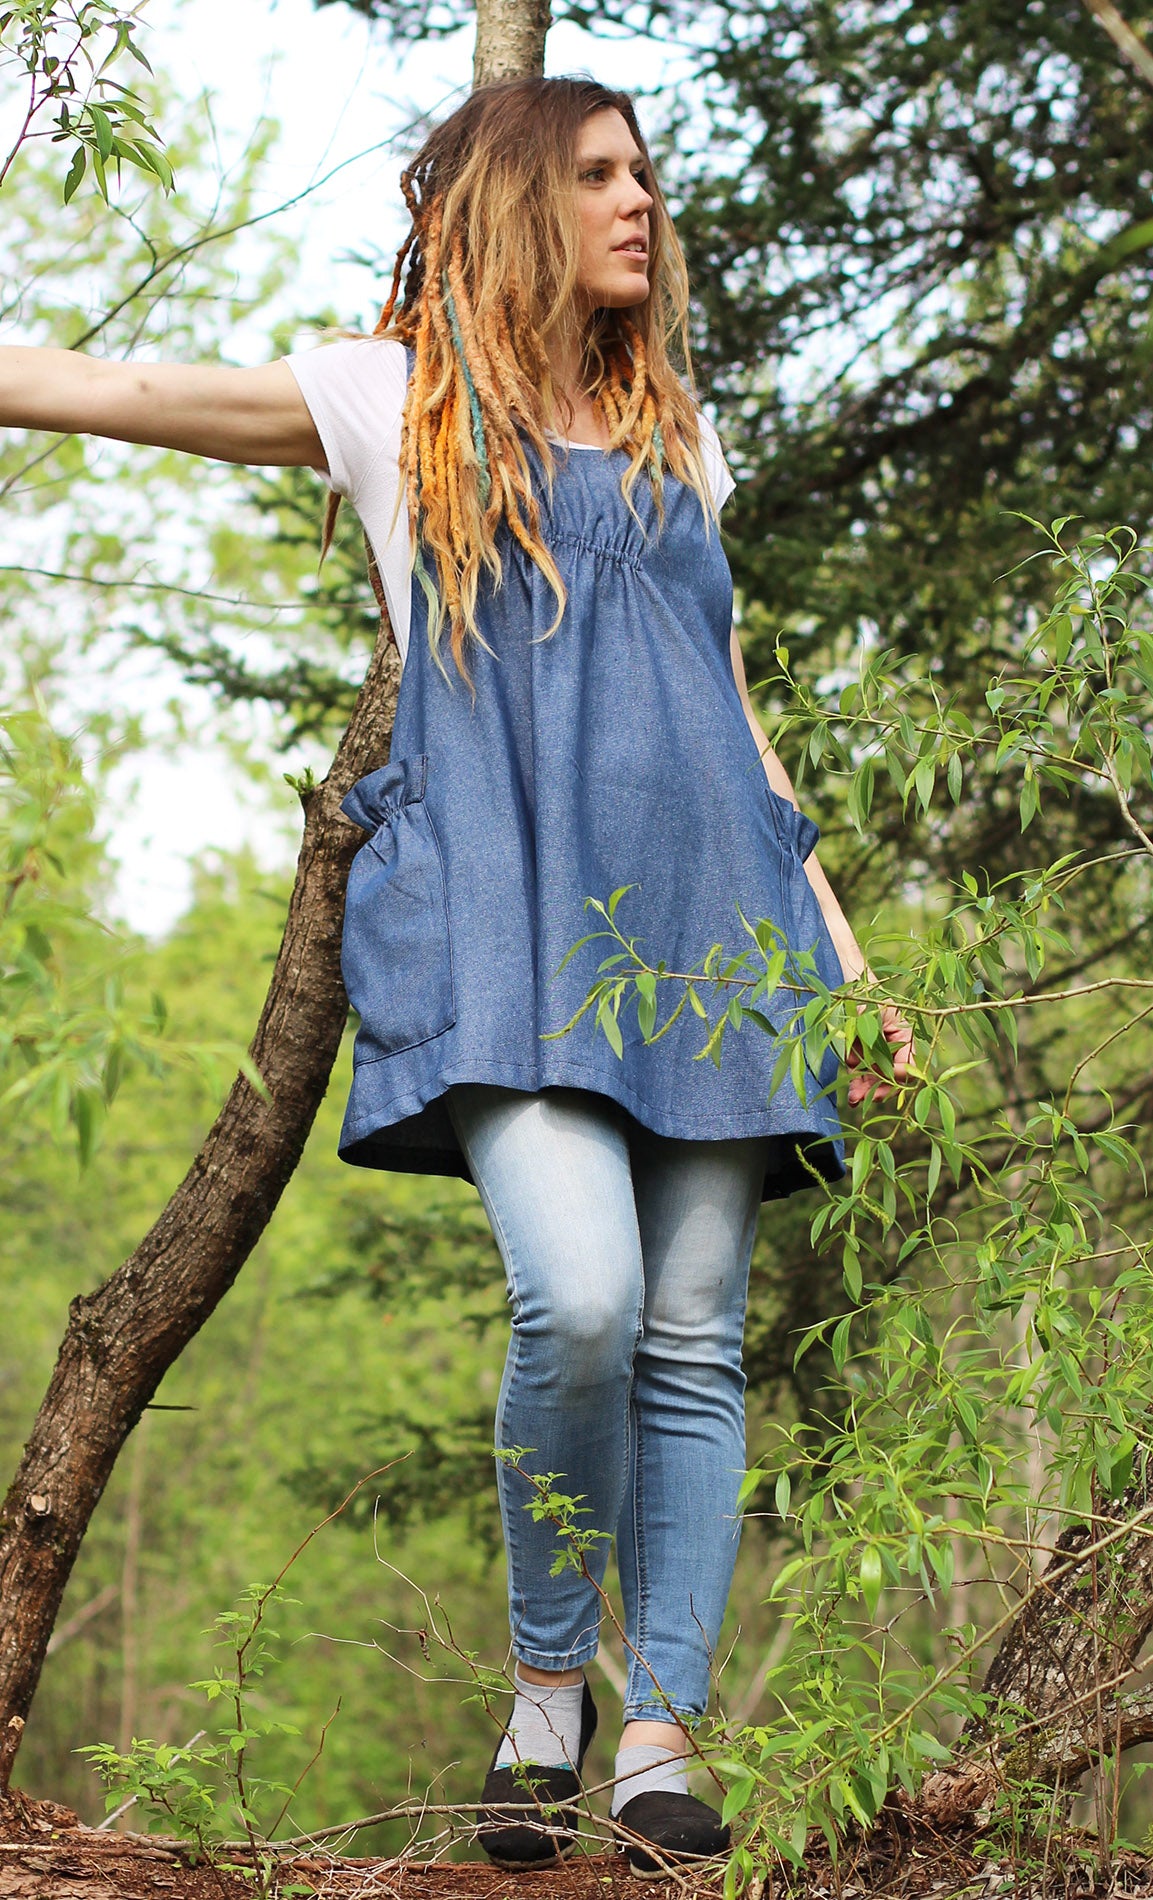 XS-5X Smock #1 in Denim - Front View with model standing on a fallen log, looking off to the side.